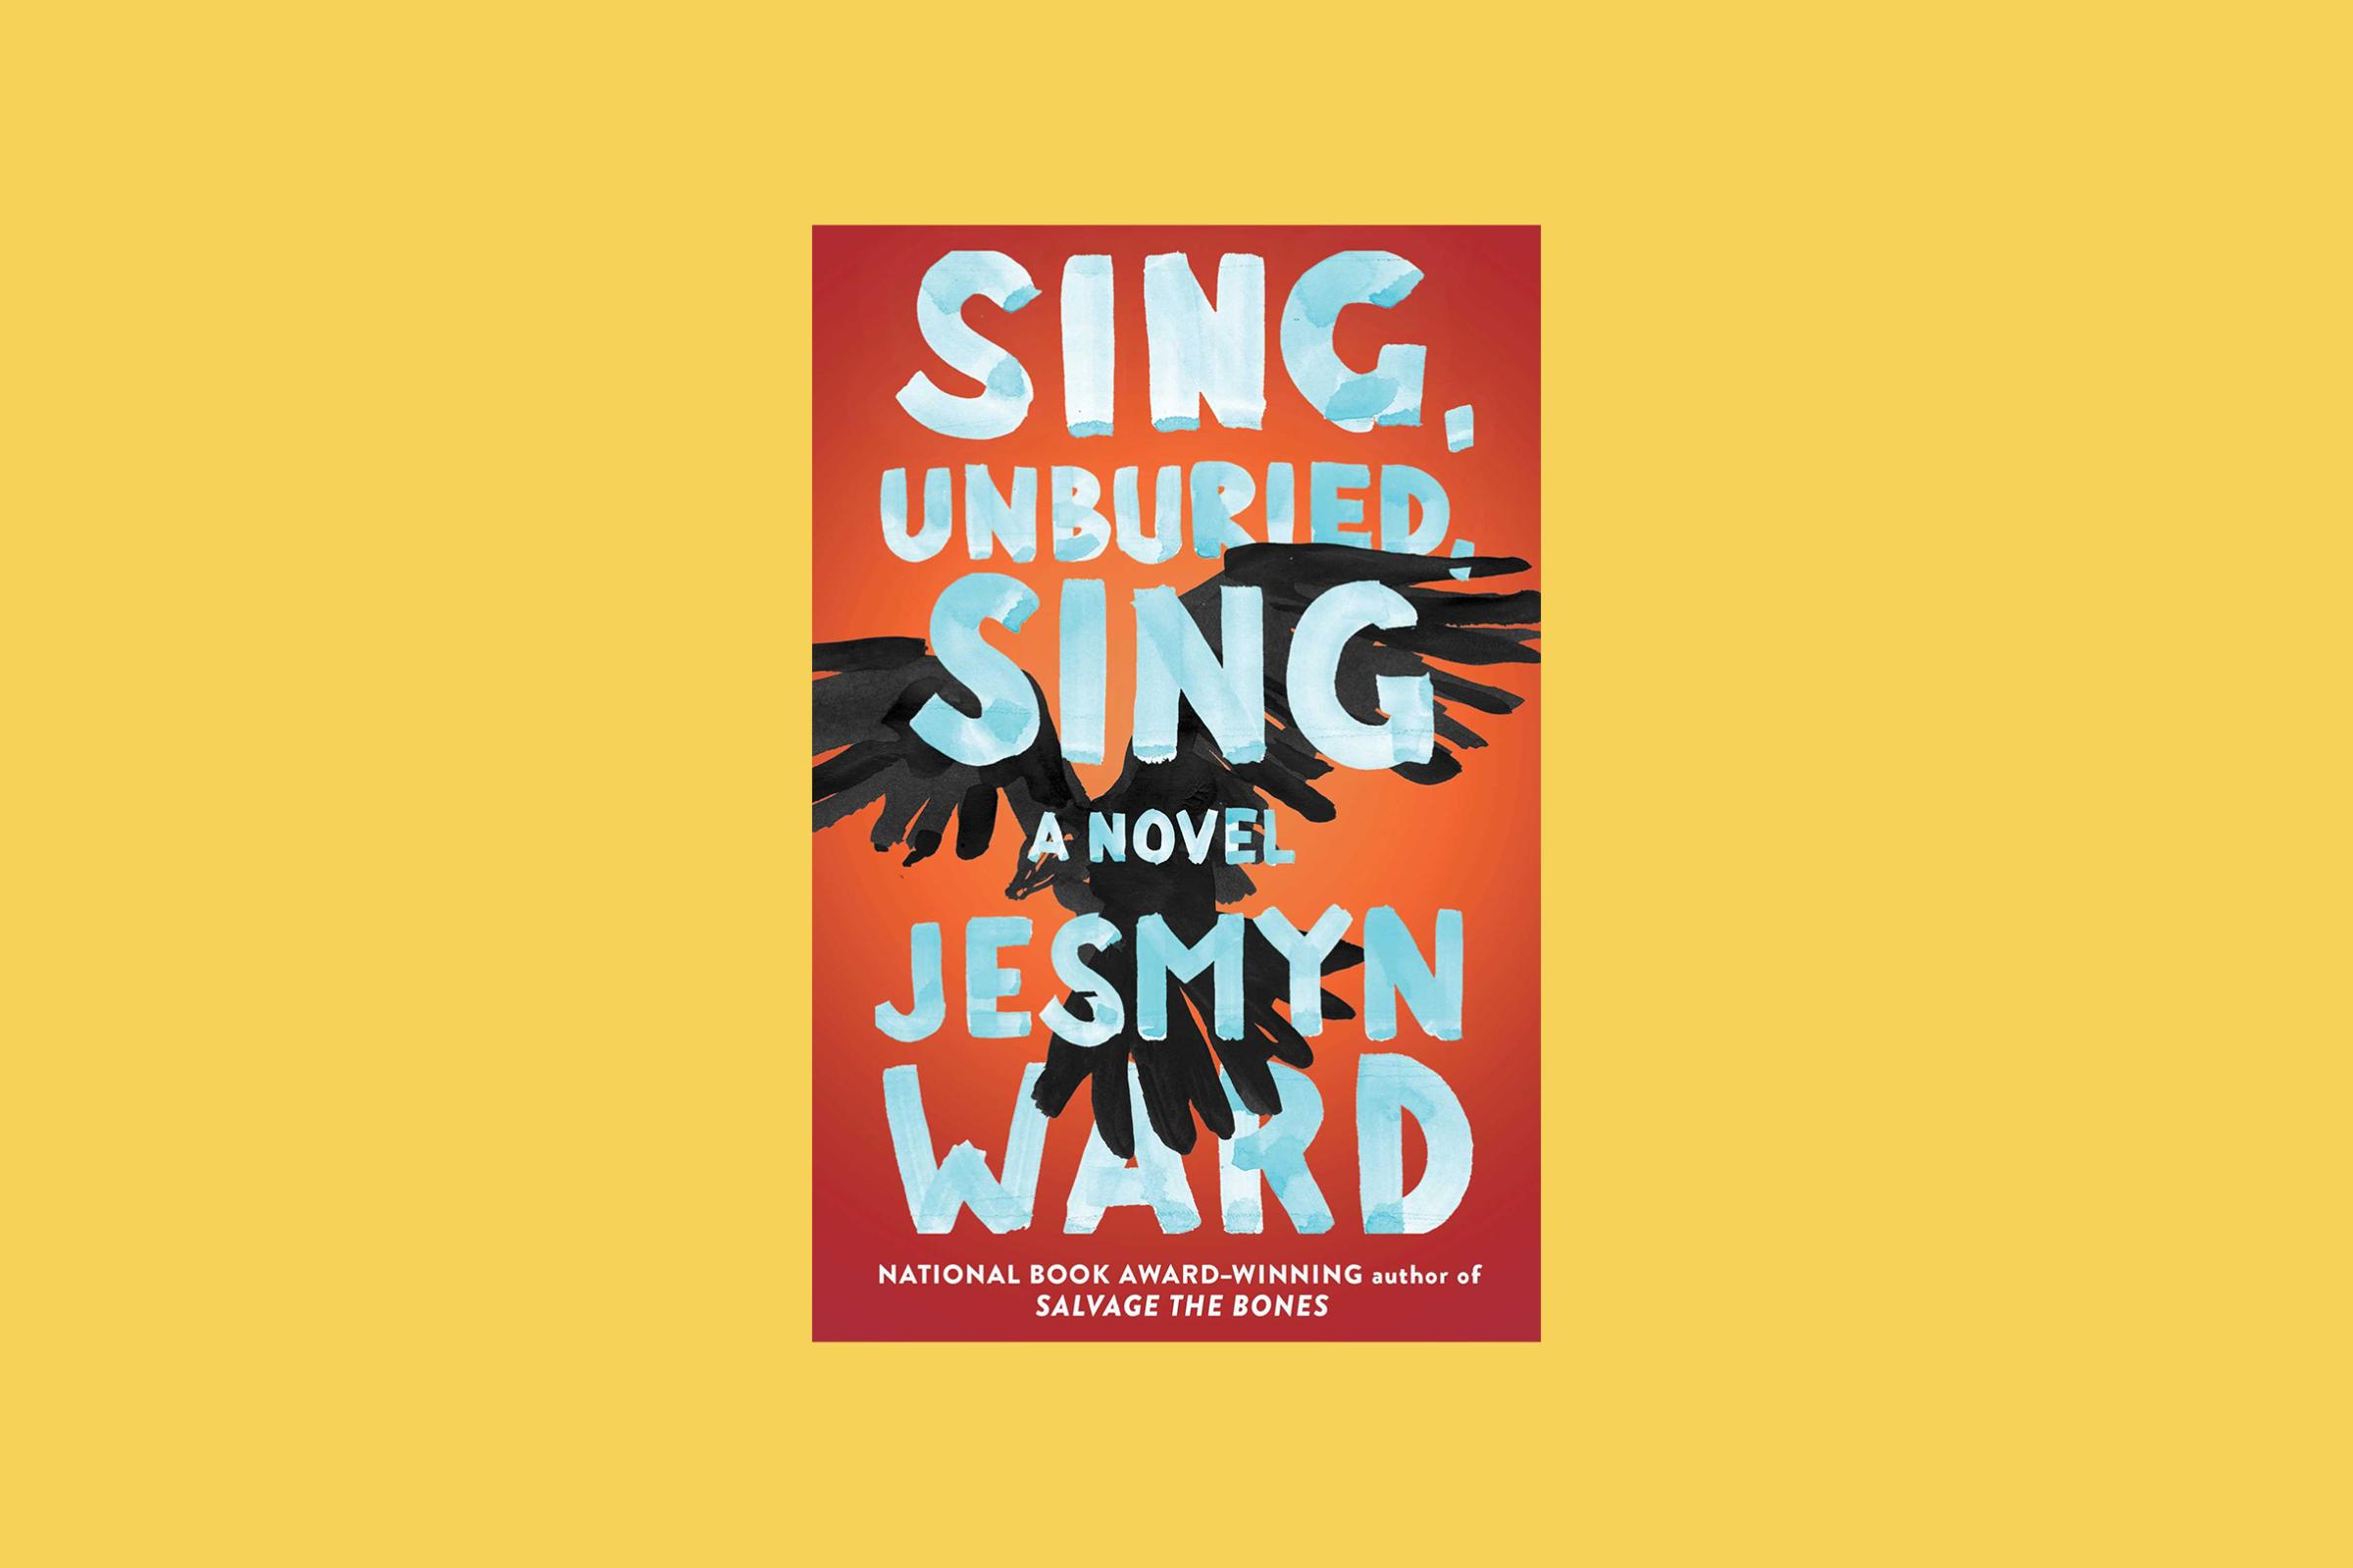 Sing, Unburied, Sing is one of the top 10 novels of 2017